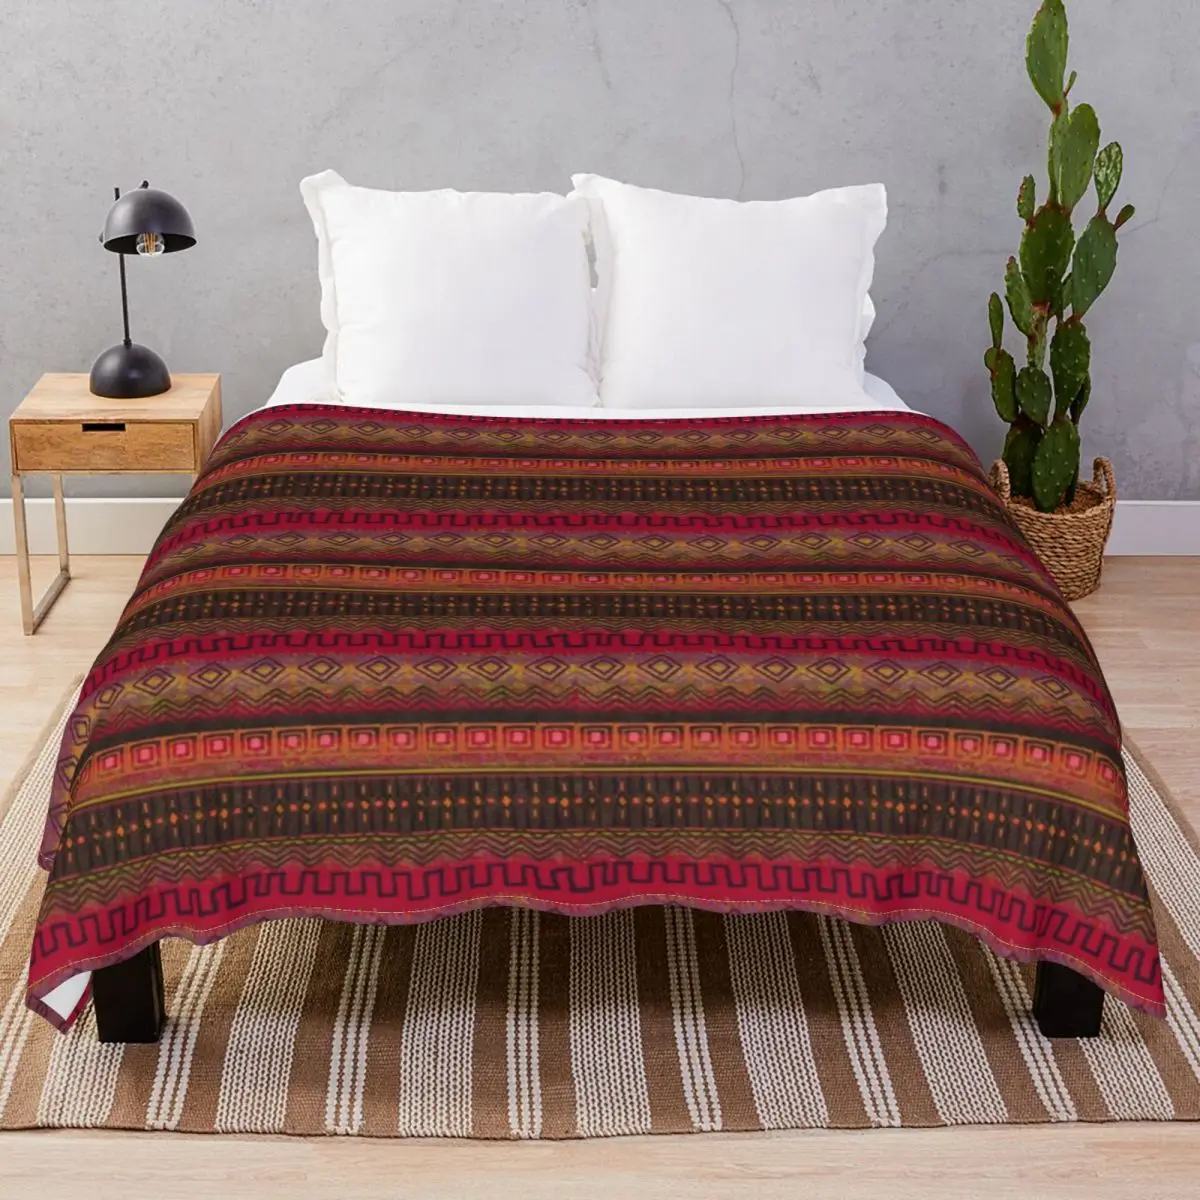 

Earthy African Ombre Mud Cloth Blankets Flannel Printed Portable Throw Blanket for Bedding Sofa Travel Office